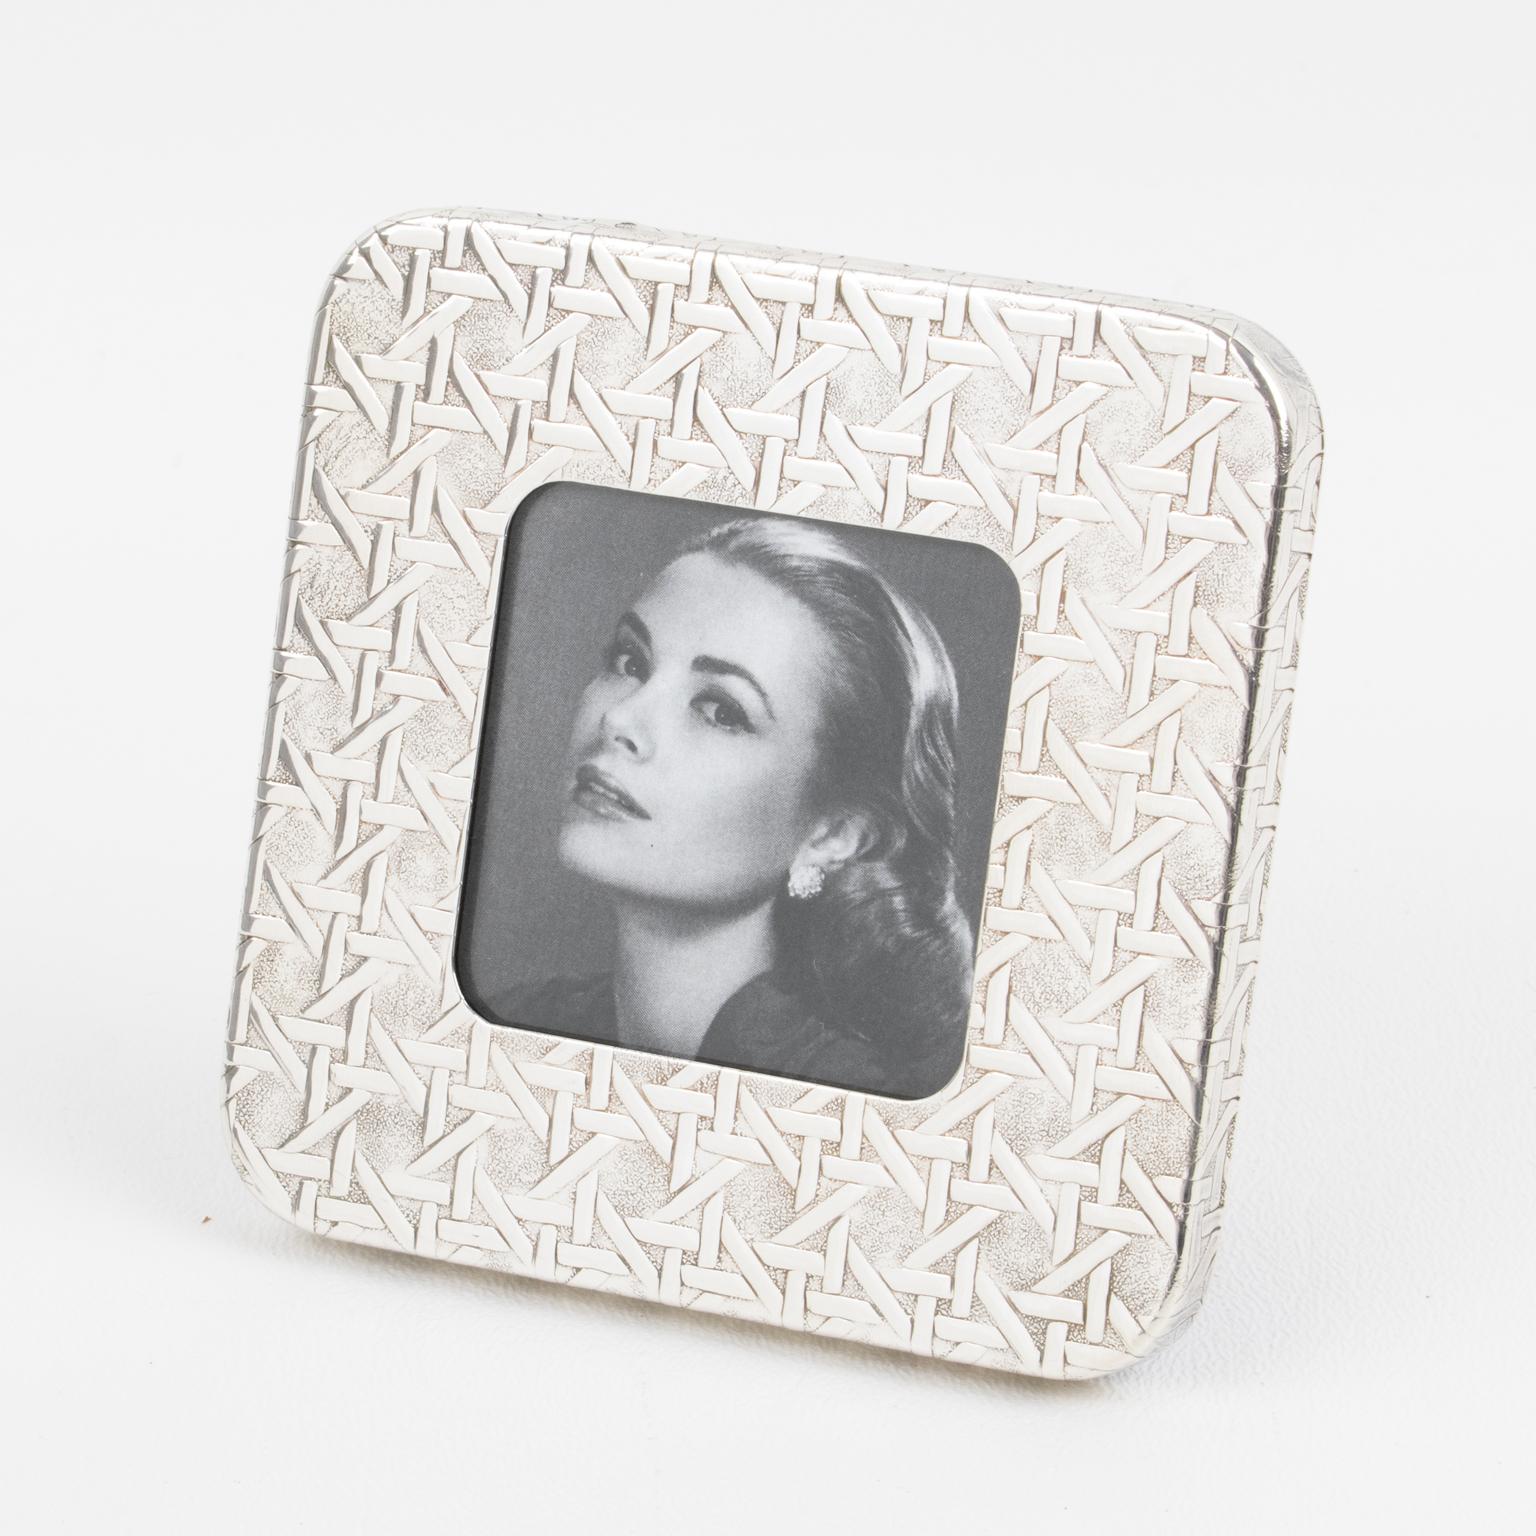 An adorable Christian Dior Paris sterling silver picture frame. Square shape with embossed caning pattern all around. The textured cane-work pattern is one of Christian Dior's most iconic designs. The company used that texture for numerous home